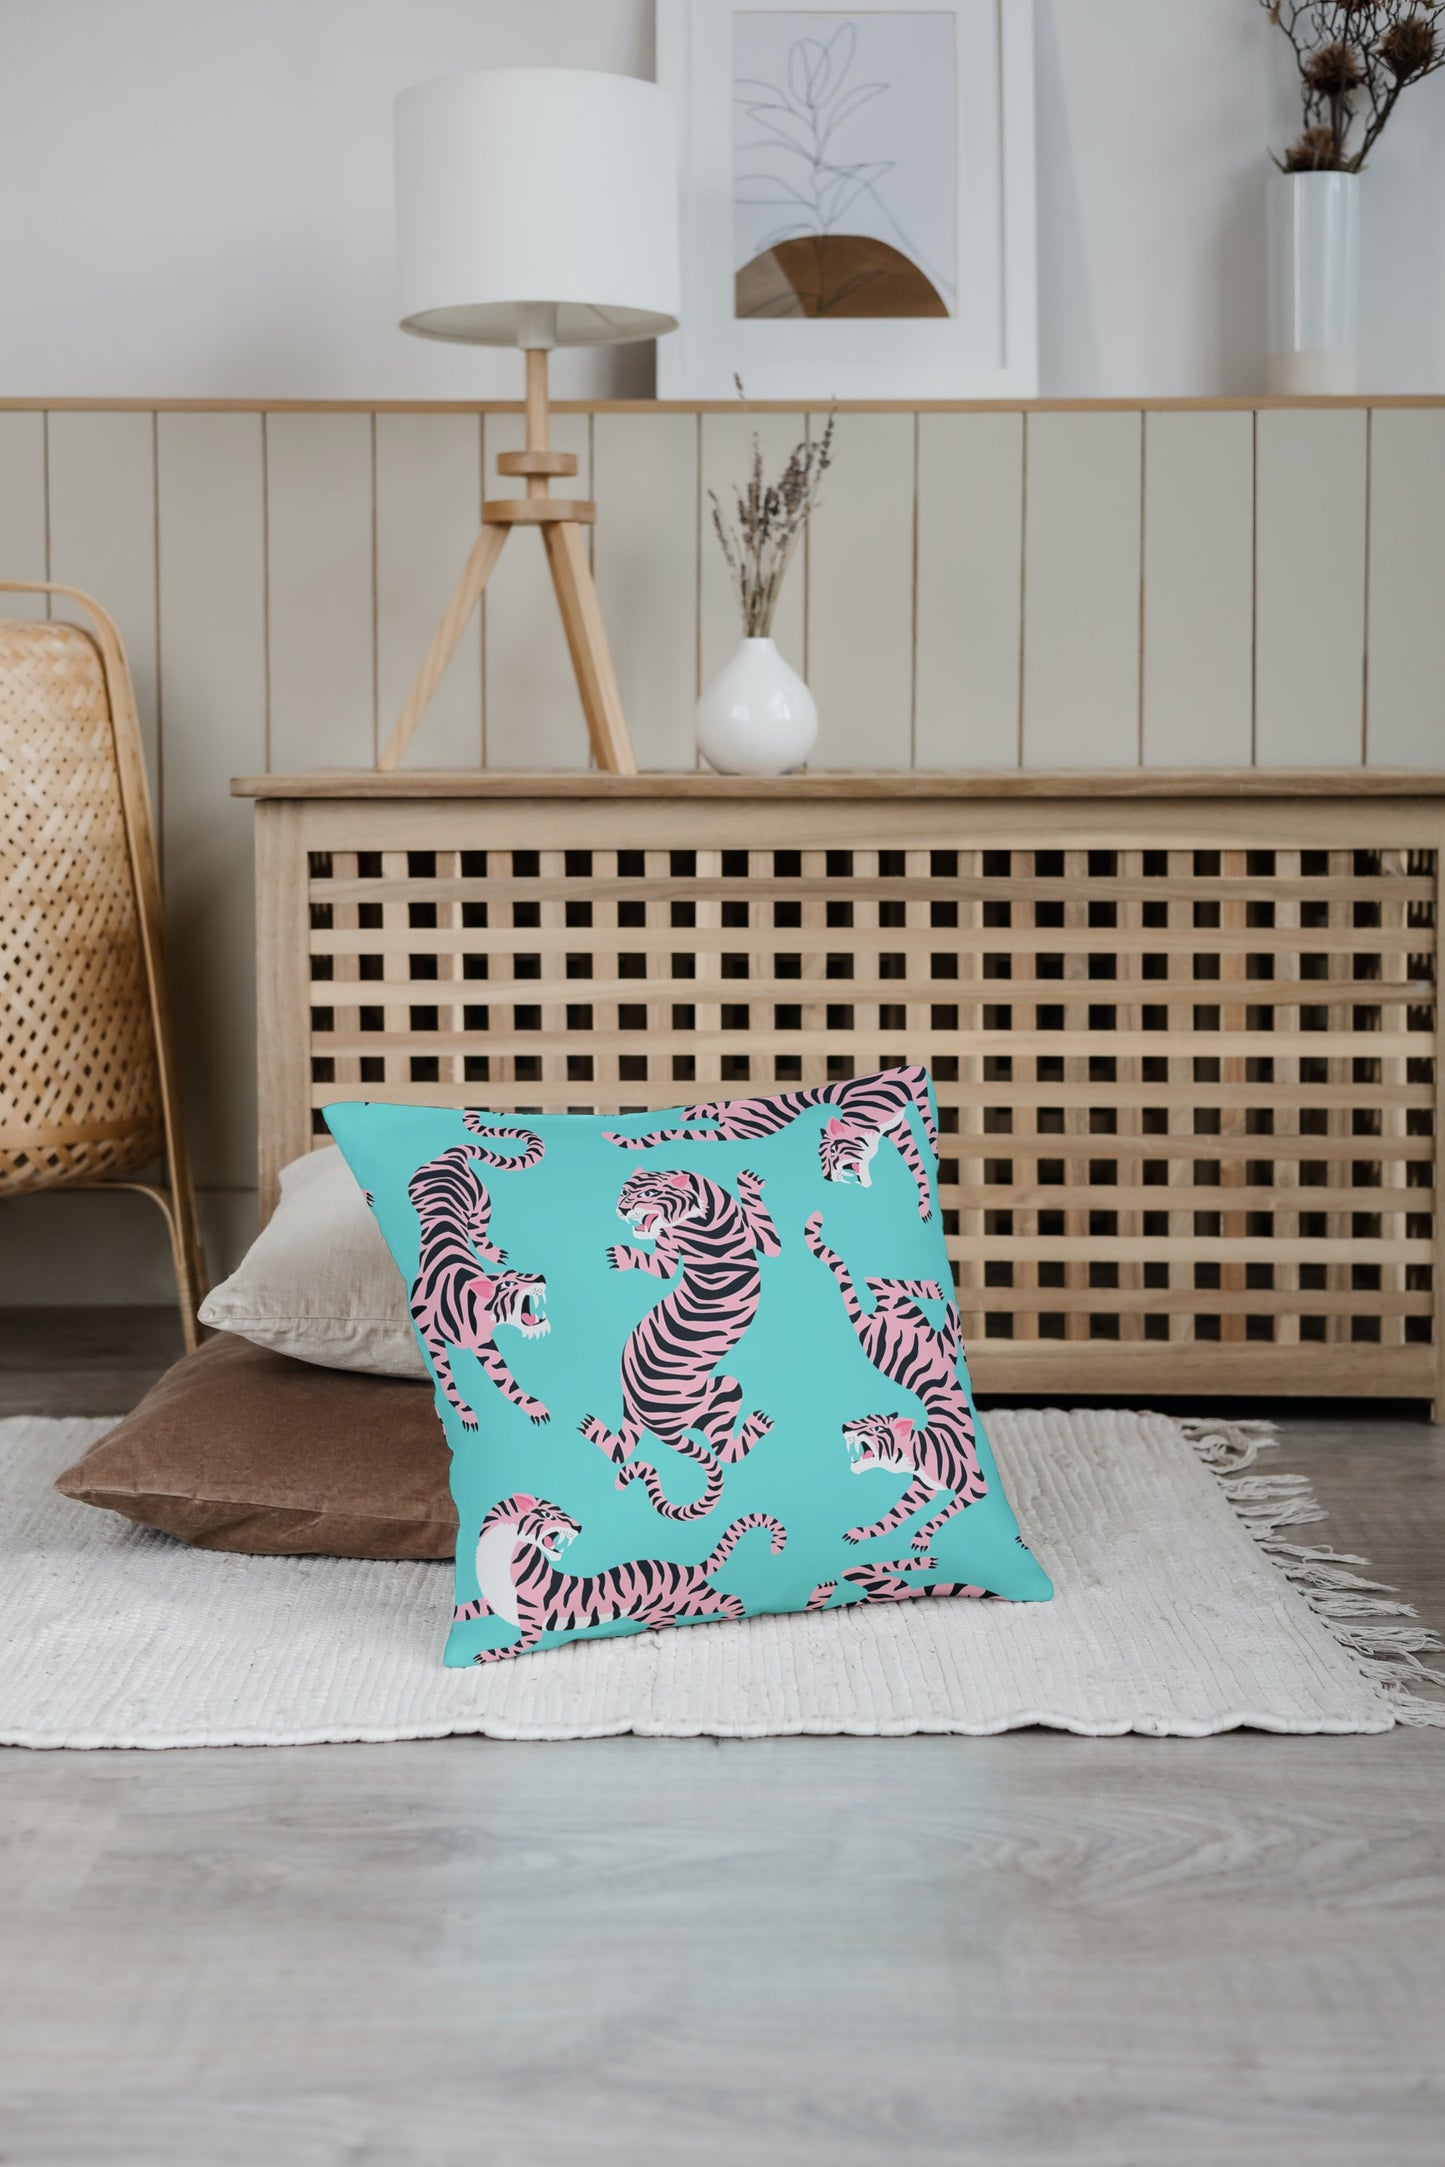 Wild Tiger Outdoor Pillows Mint Turquoise